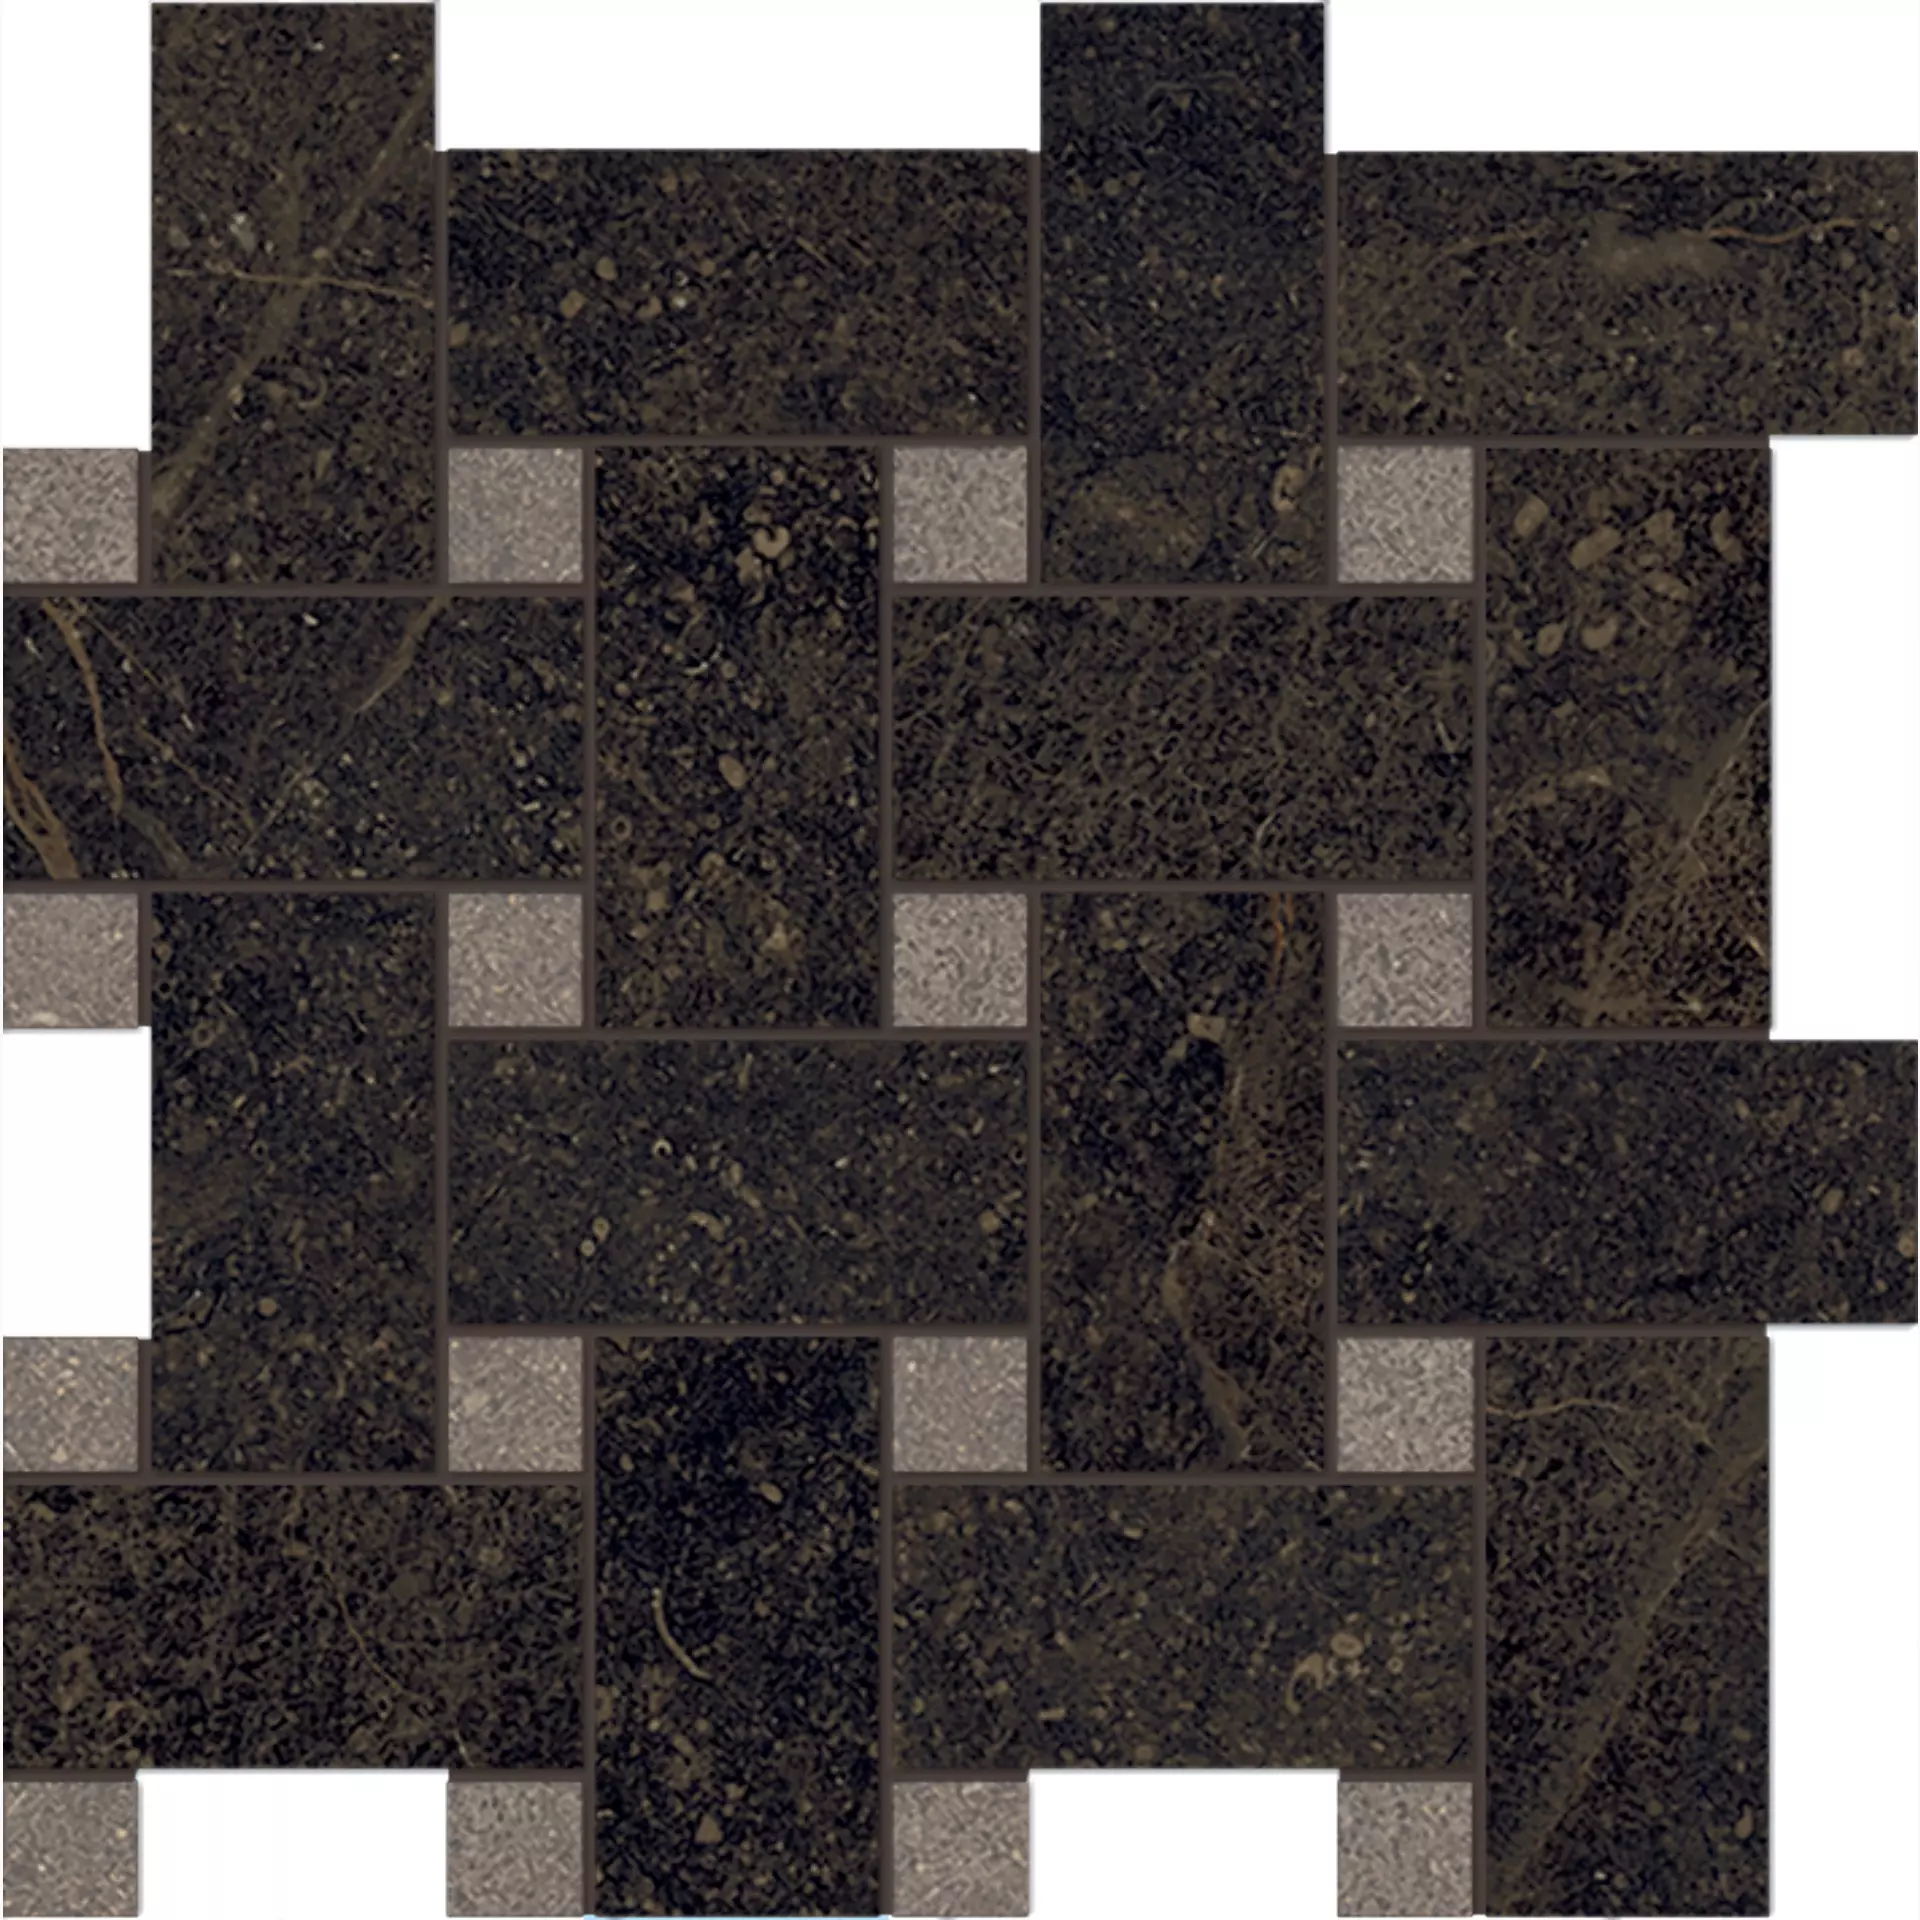 Fondovalle Planeto Pluto Natural Mosaic Basket PNT025A 30x30cm rectified 8,5mm